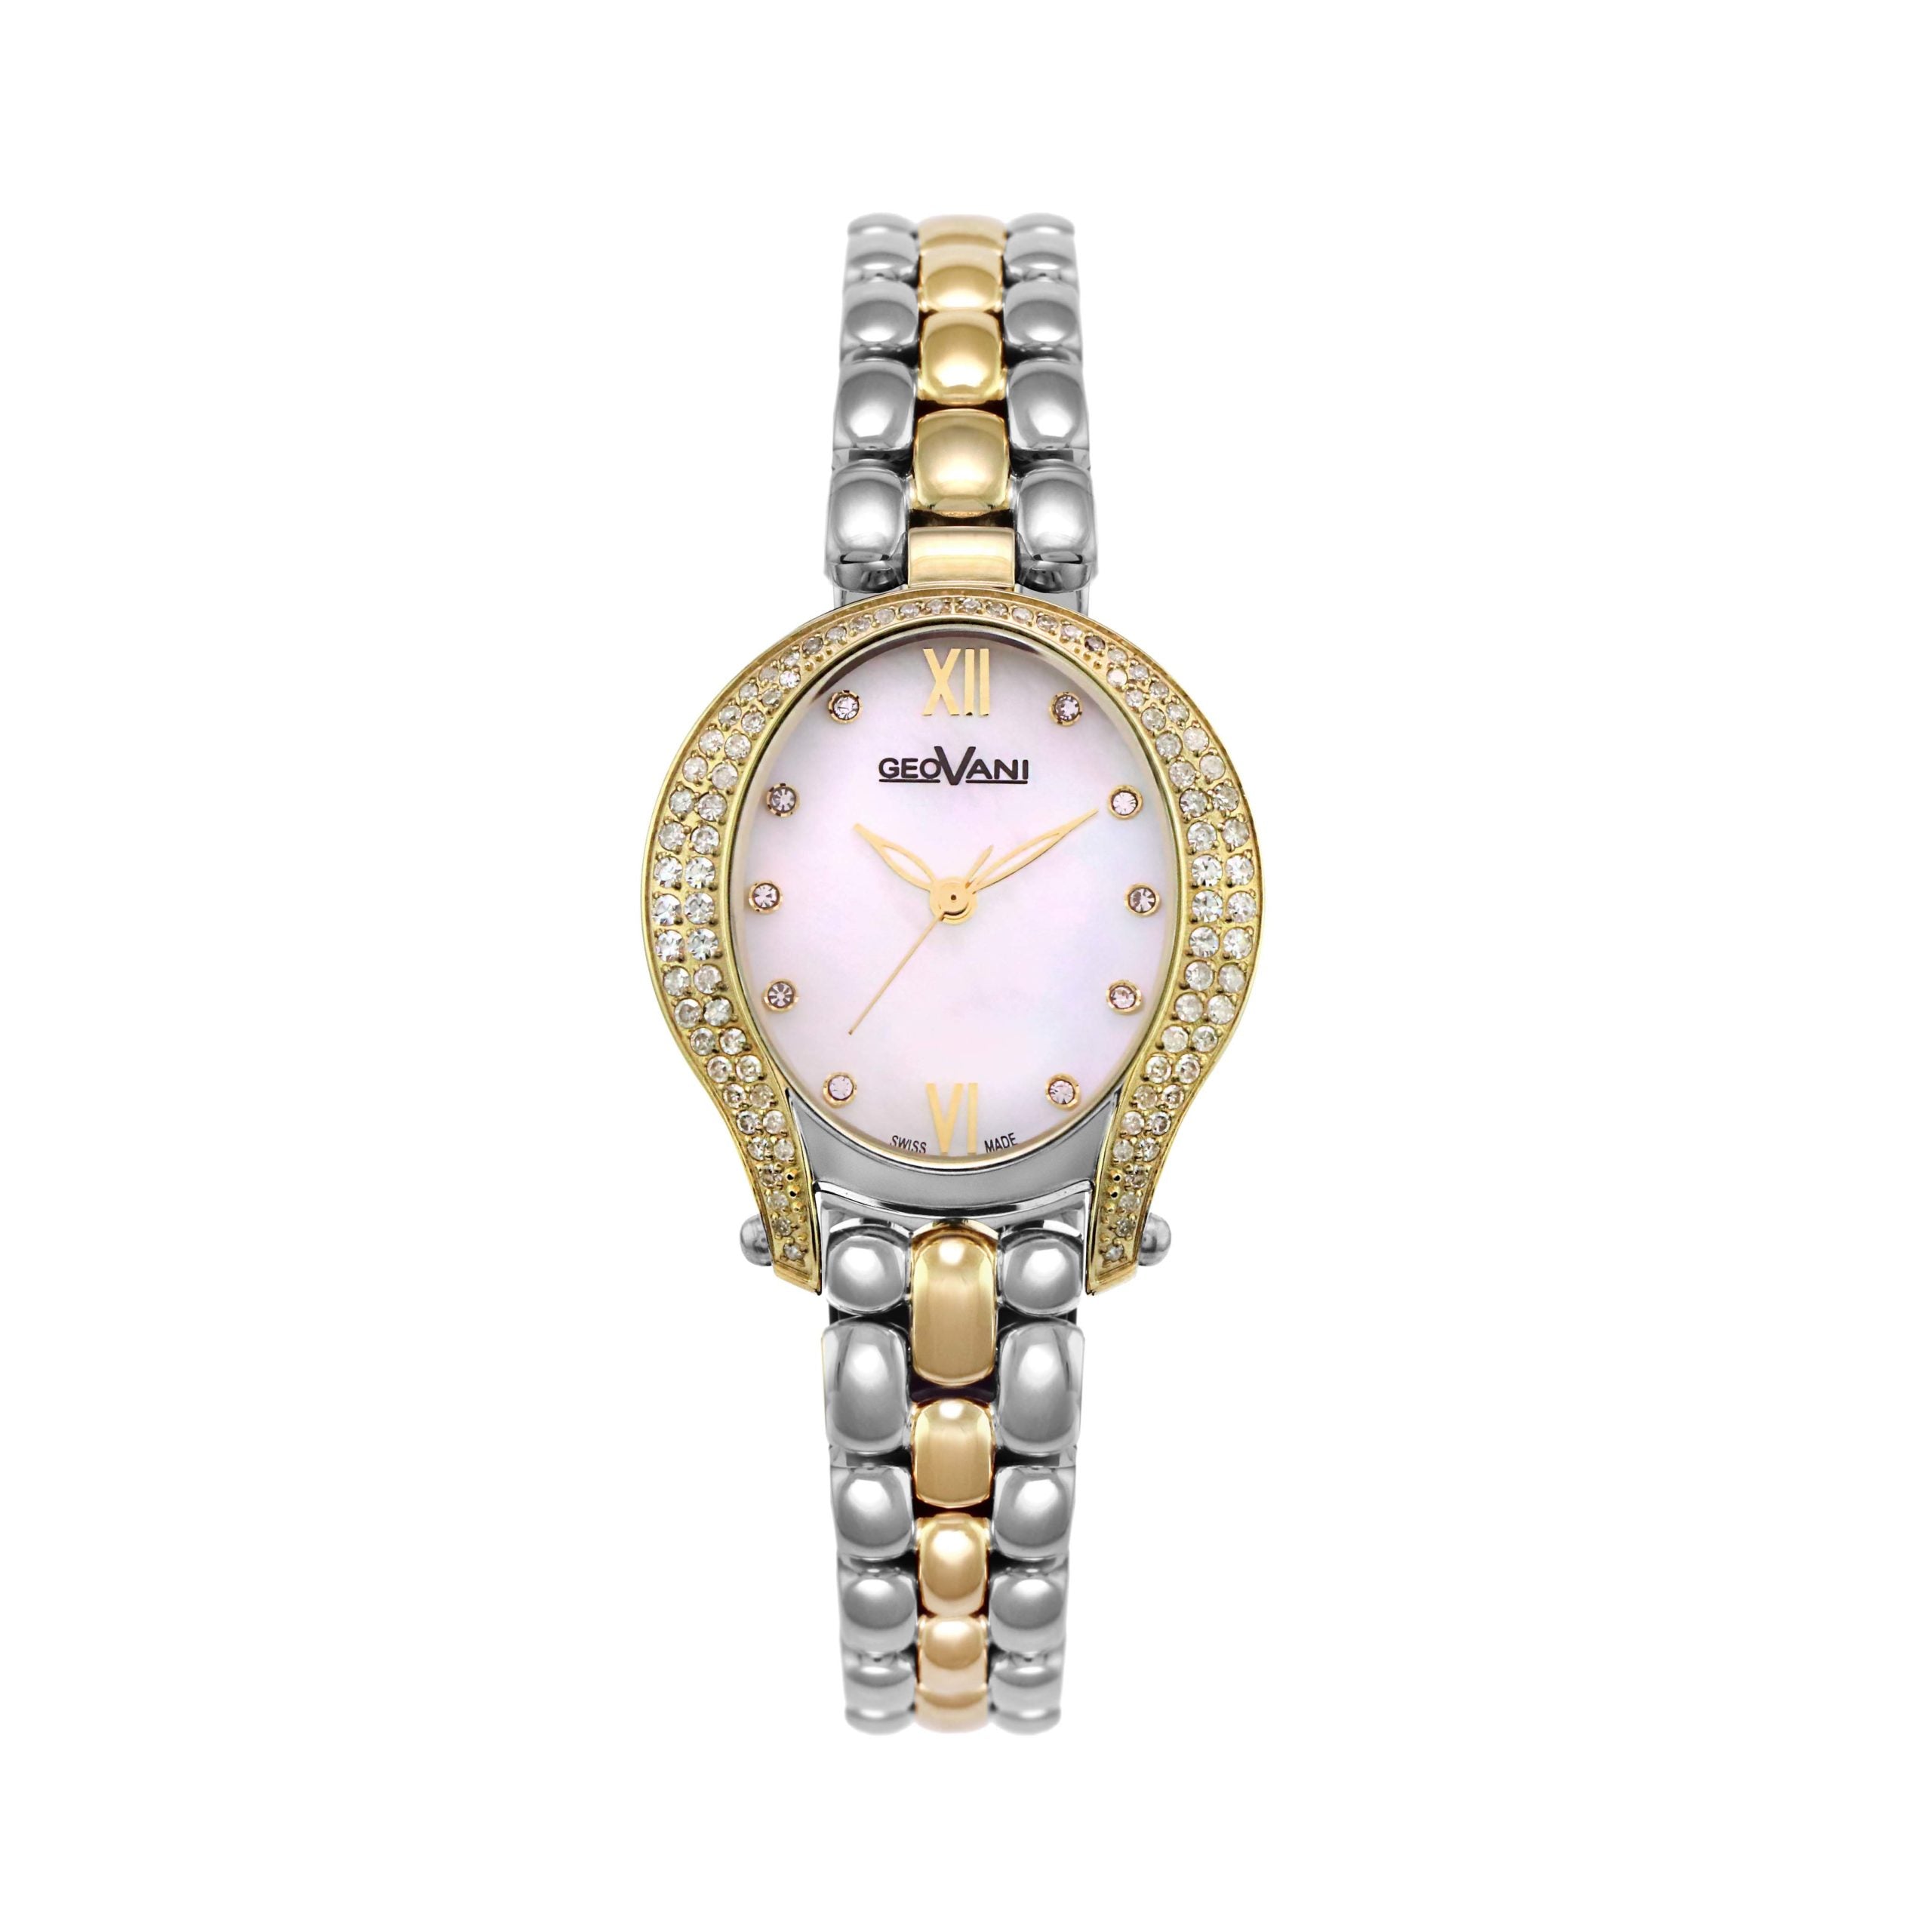 Giovanni Women's Swiss Quartz Watch with Pearly Pink Dial - GEO-0029